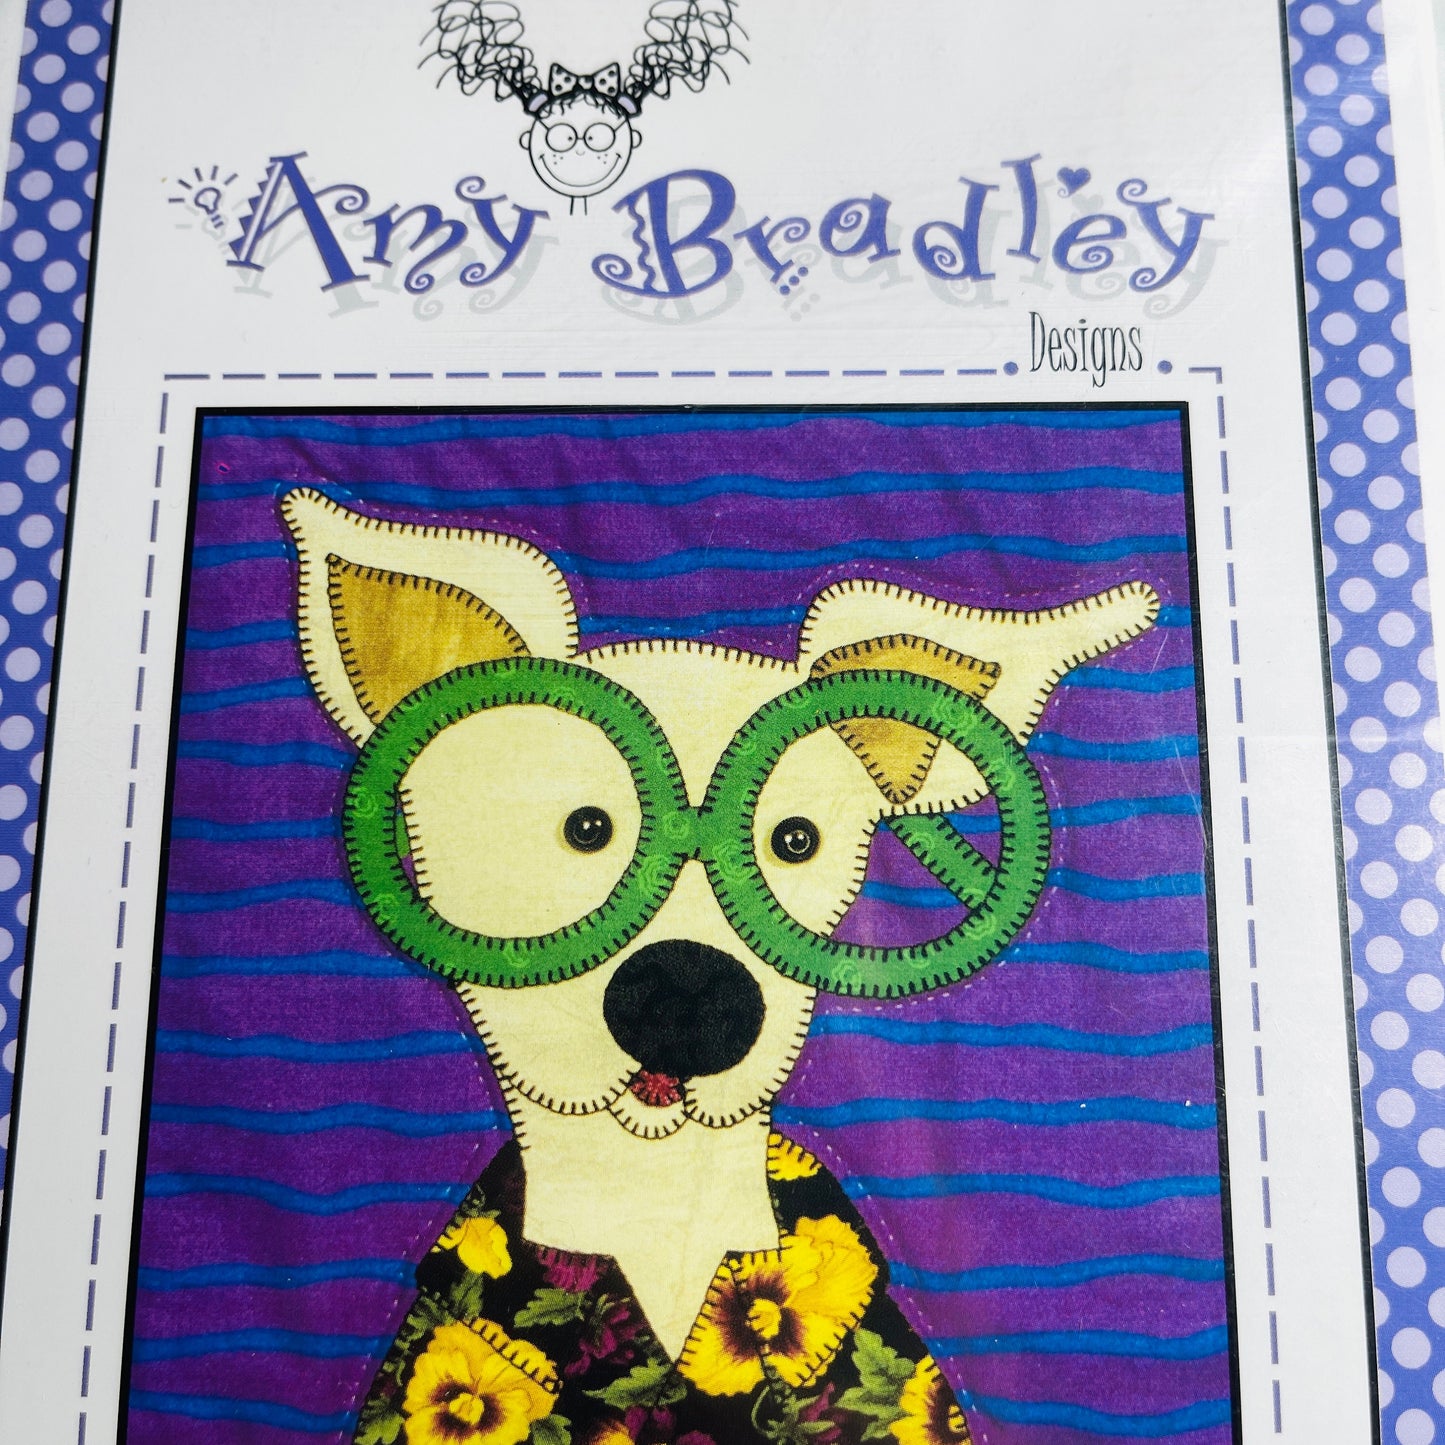 Amy Bradley, Dazzling Dogs Series, Choice of Major, Winton, or T.C., Quilting Design Block Patterns